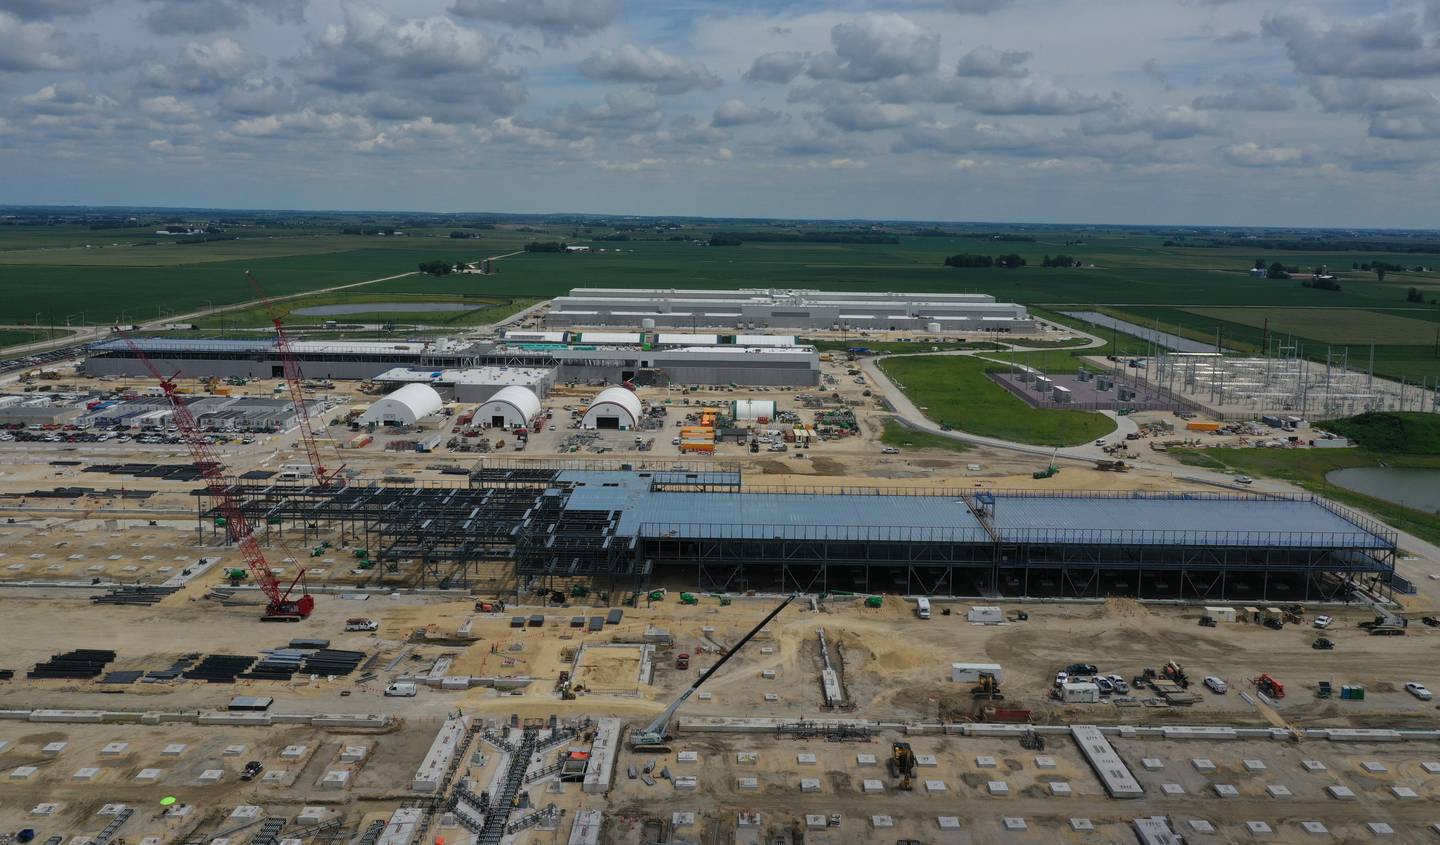 An aerial view of the Facebook’s DeKalb Data Center site shows the progress of the 500 acre project on Tuesday, July 26, 2022 in DeKalb. Facebook’s parent company, Meta, announced earlier this year that the DeKalb Data Center expanded into three buildings, bringing with it a community investment that now totals more than $1 billion.